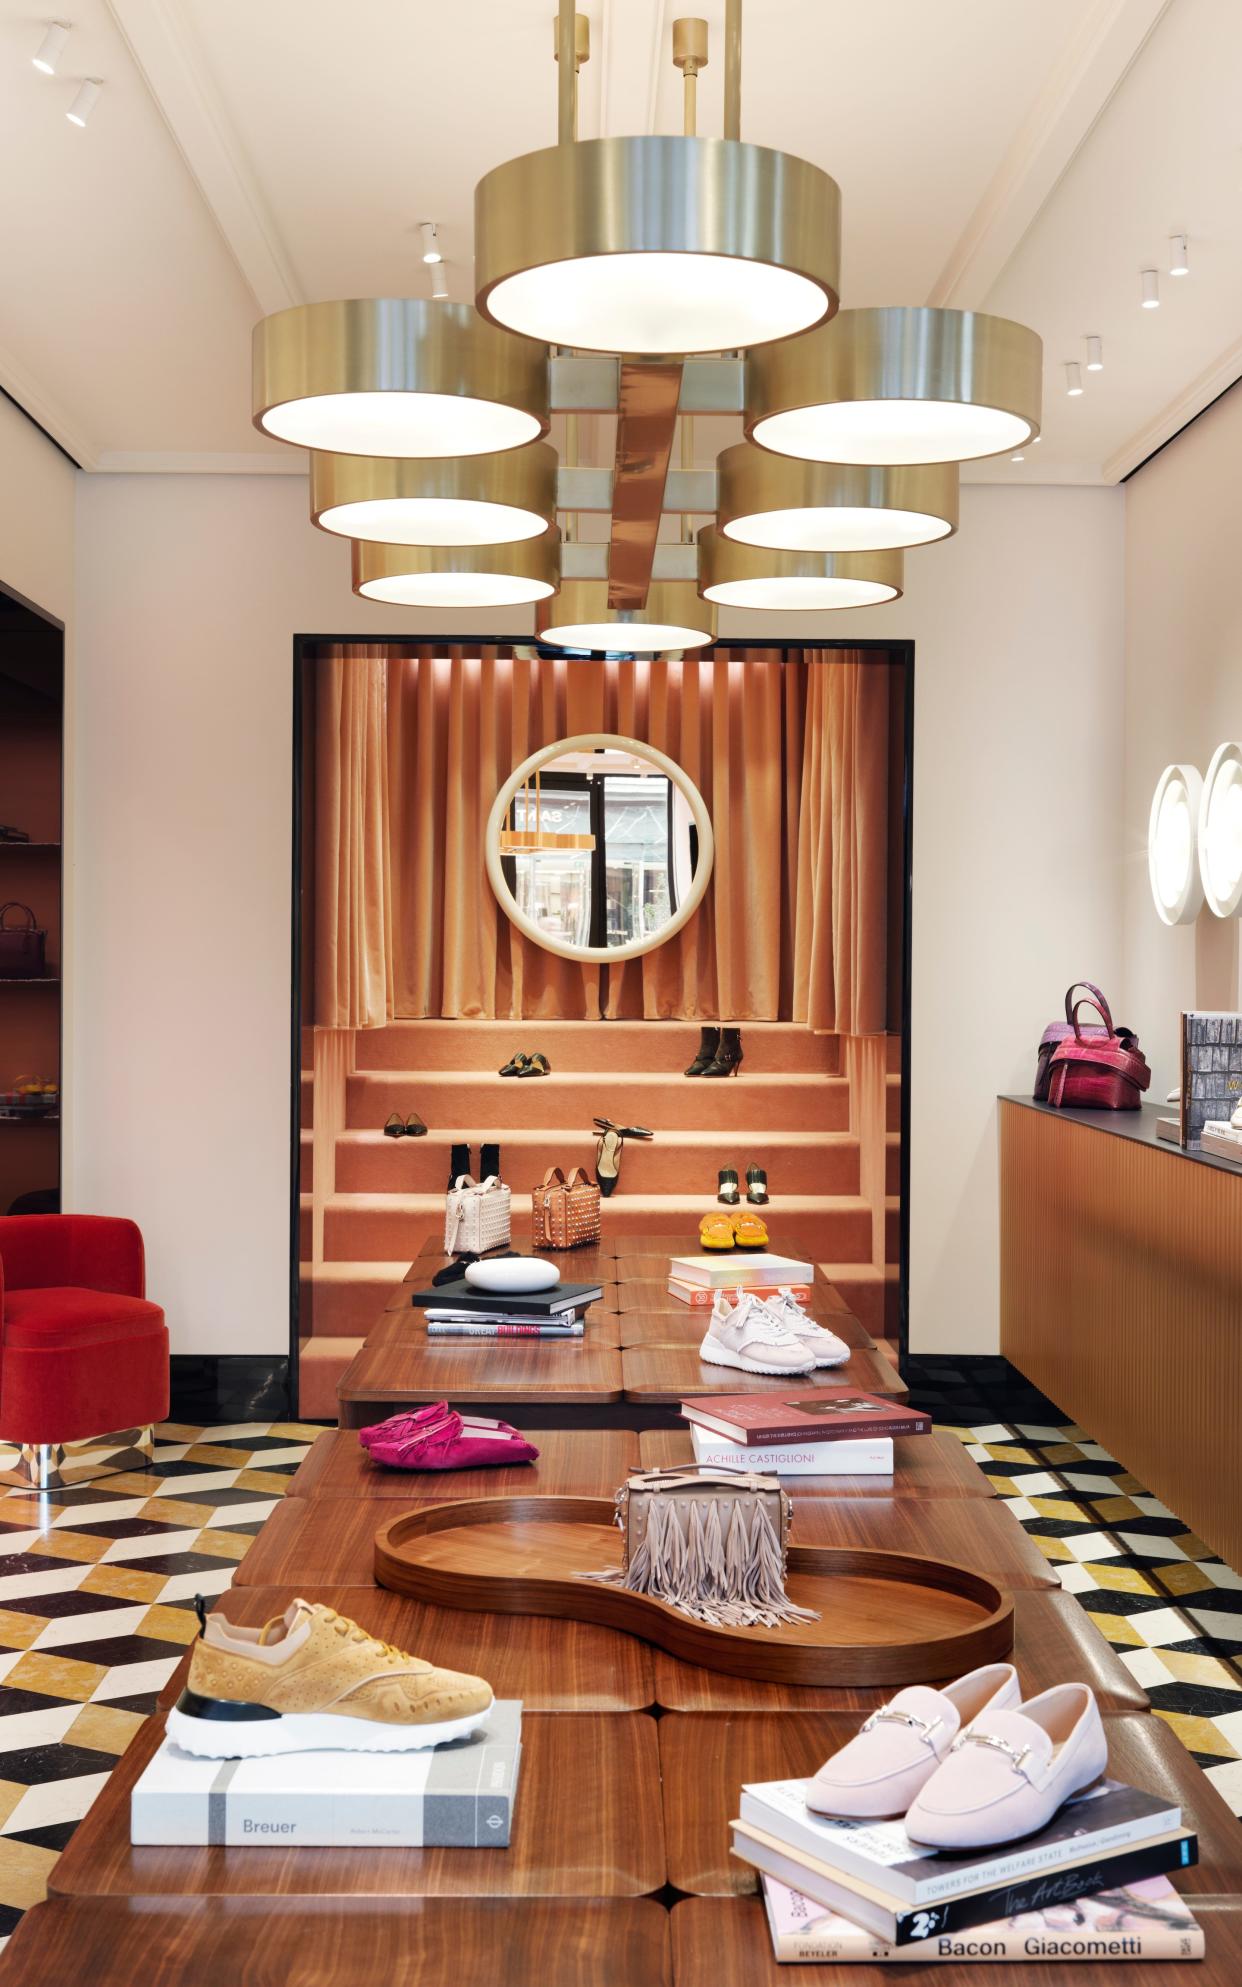 The new Tod's boutique, designed by India Mahdavi, is made to feel more like an apartment than a shop - All rights Chris Tubbs Photography